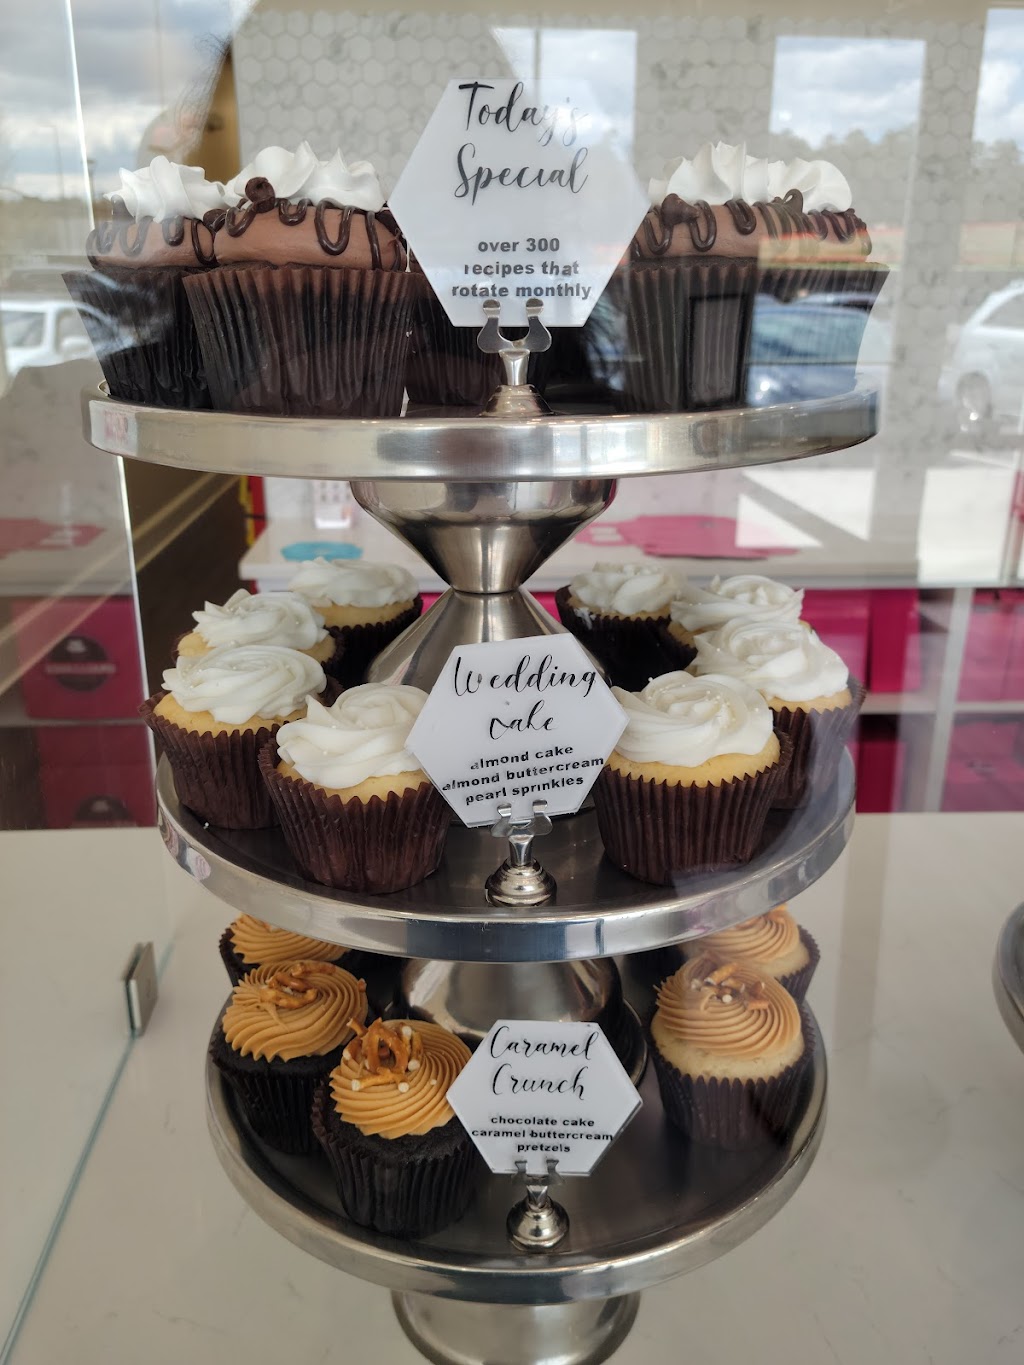 Smallcakes Buford: A Cupcakery and Creamery | The Exchange at Gwinnett, 2925 Buford Dr Ste 1220, Buford, GA 30519, USA | Phone: (770) 224-8033